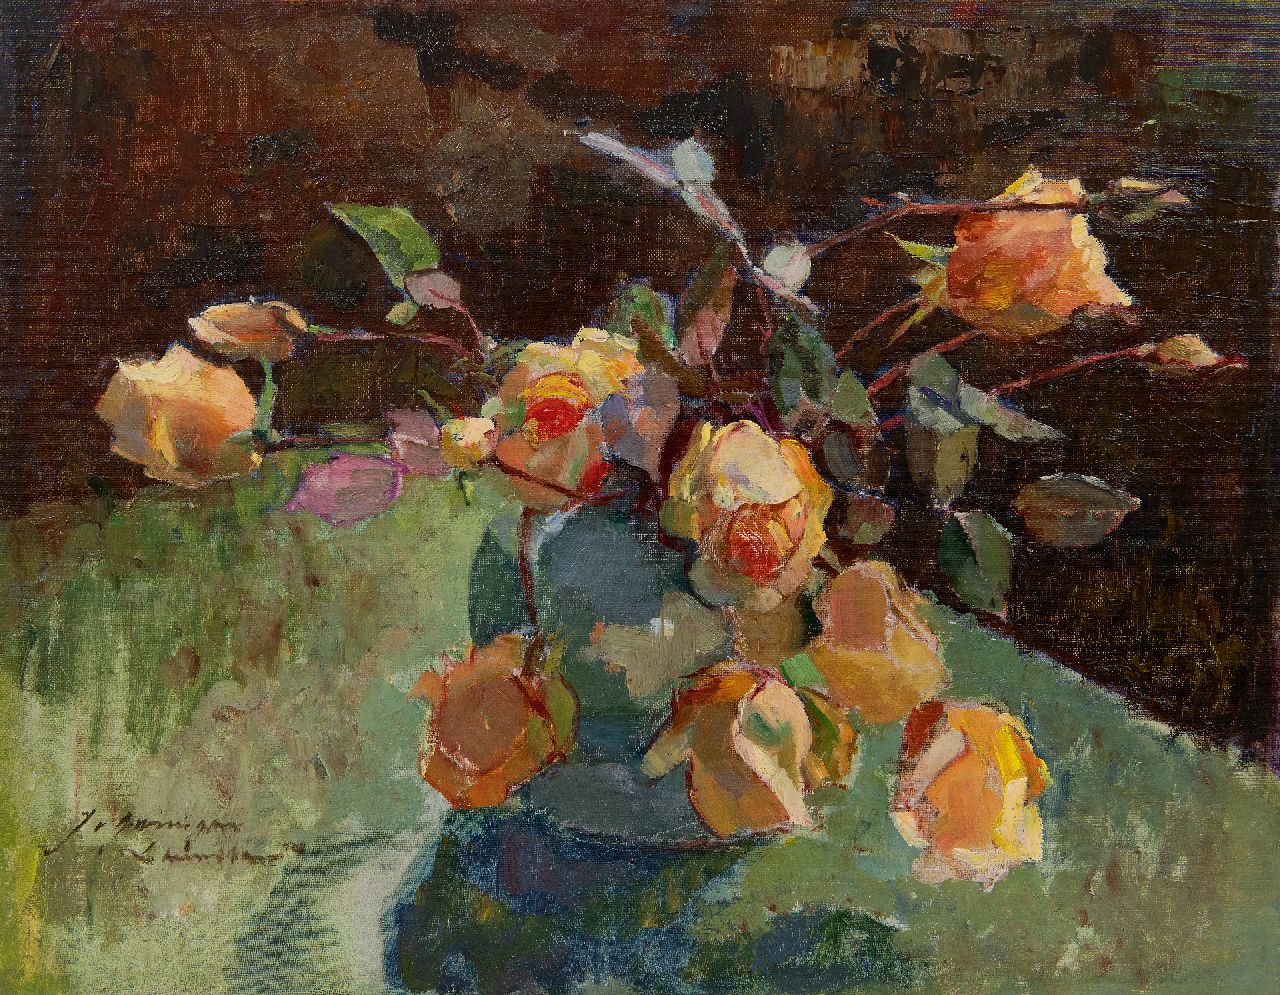 Groningen-Laurillard J.A.G. van | 'Jacoba' Adriana Geertruida van Groningen-Laurillard | Paintings offered for sale | Flower stilllife with yellow roses, oil on canvas laid down on panel 39.7 x 49.9 cm, signed l.l.